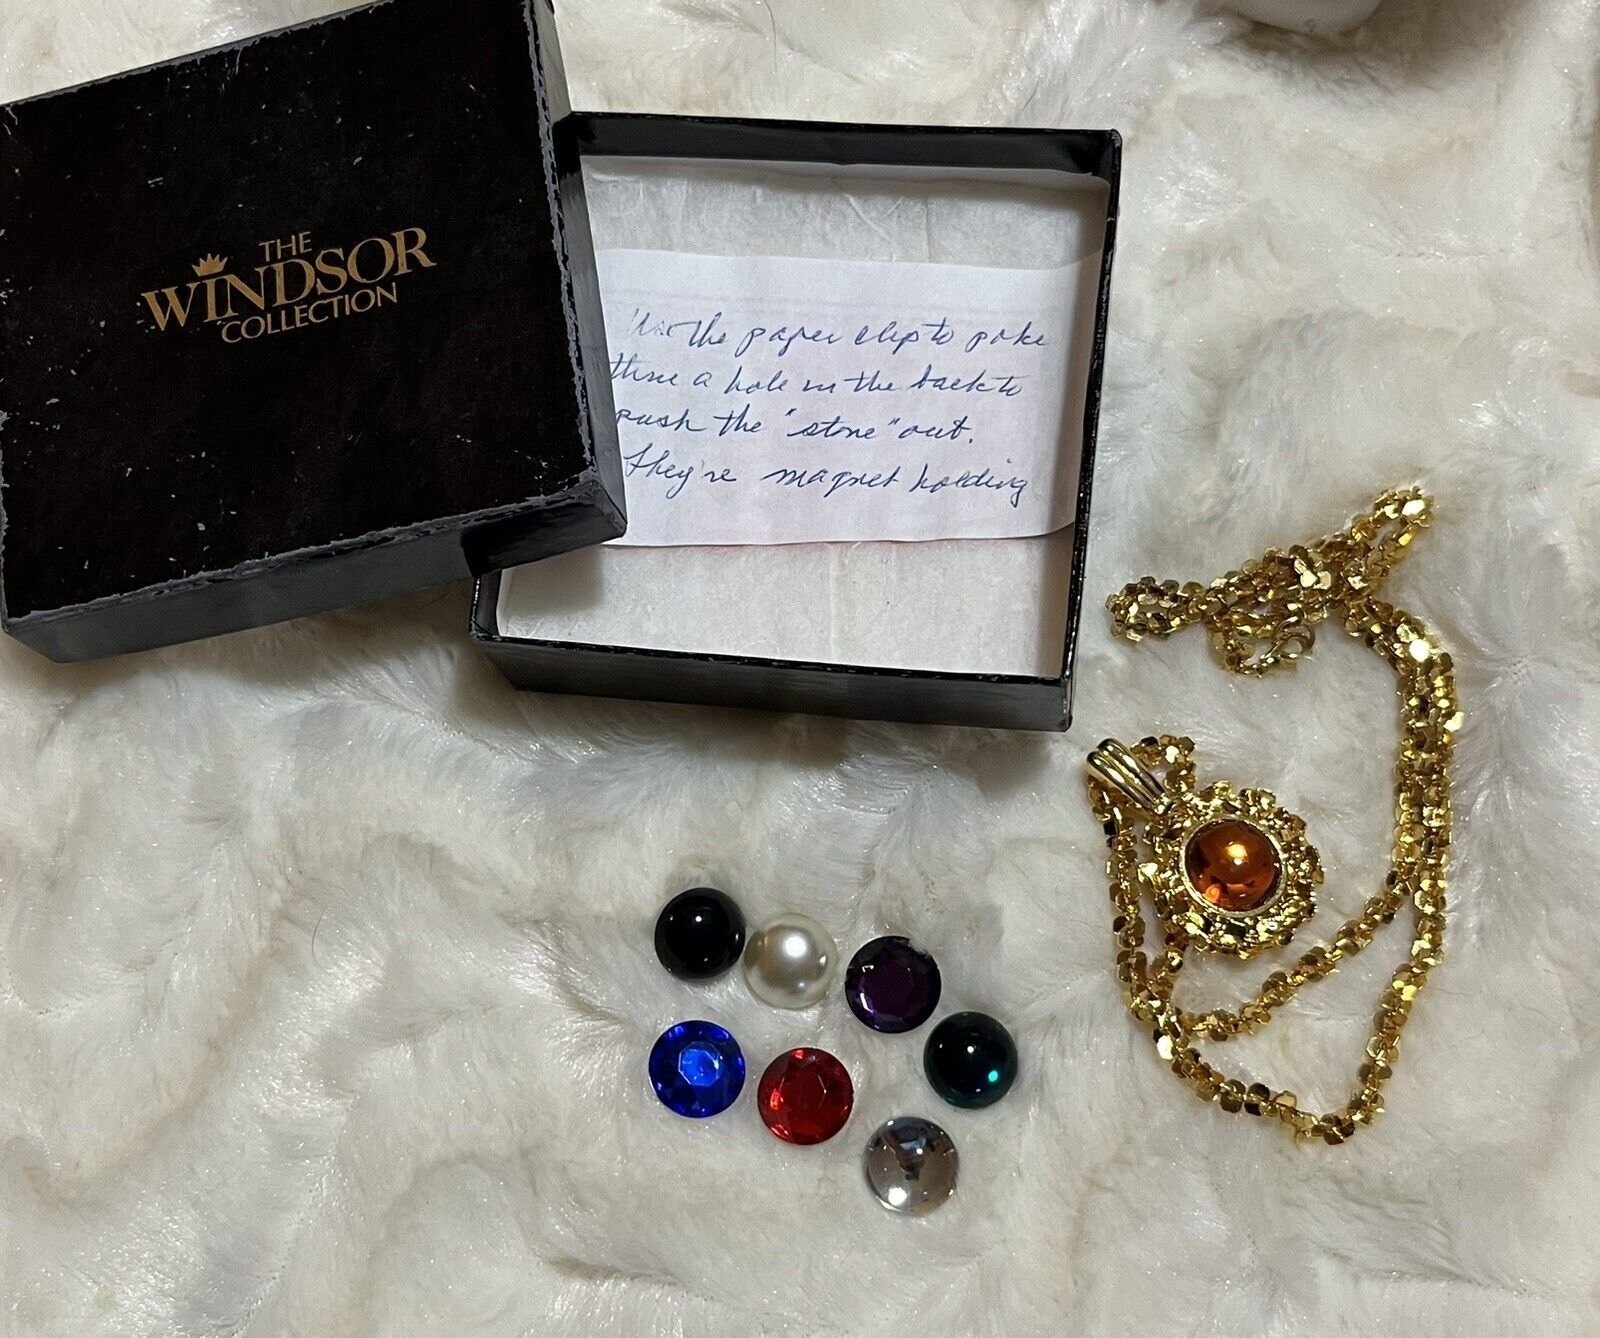 VINTAGE THE WINDSOR COLLECTION INTERCHANGEABLE RHINESTONE NECKLACE - $49.45